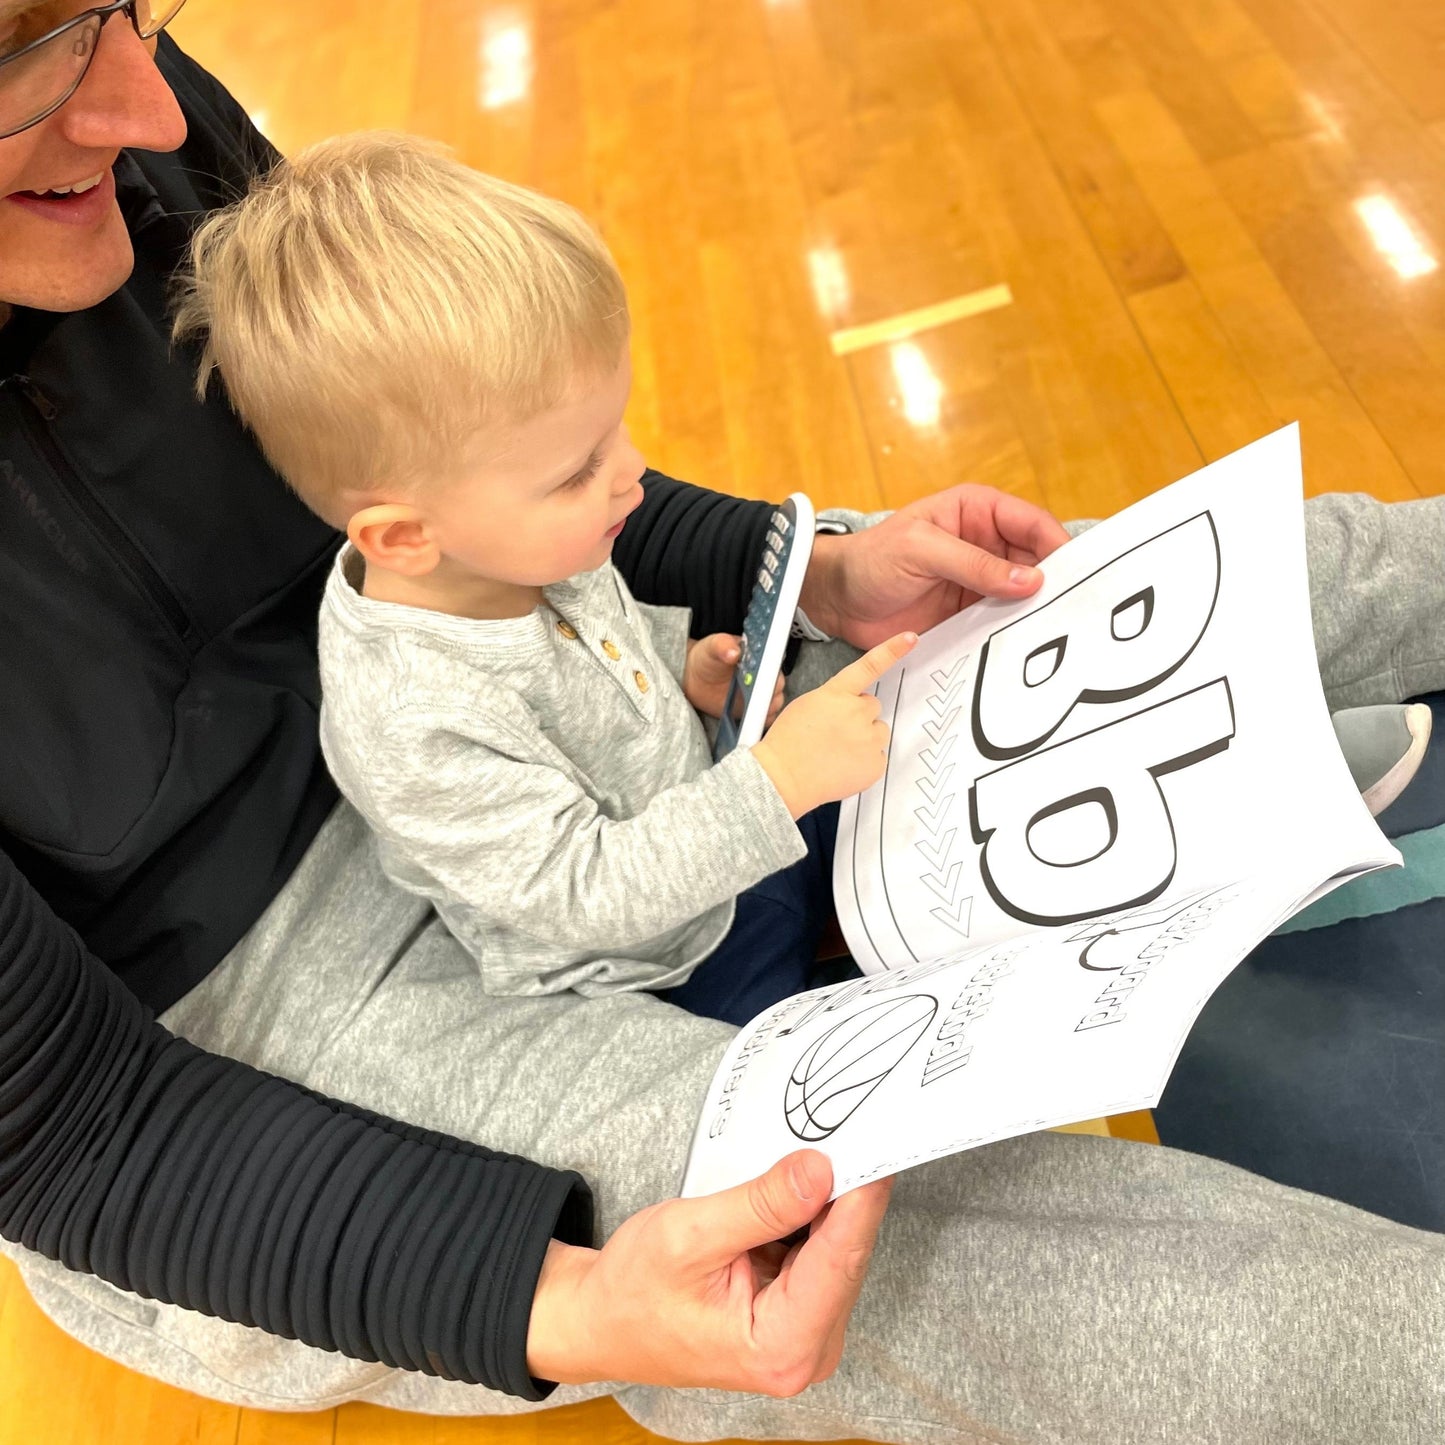 ABC's of Basketball: Coach's Kid Edition: A Coloring and Activity Book for the Basketball-Loving Kid